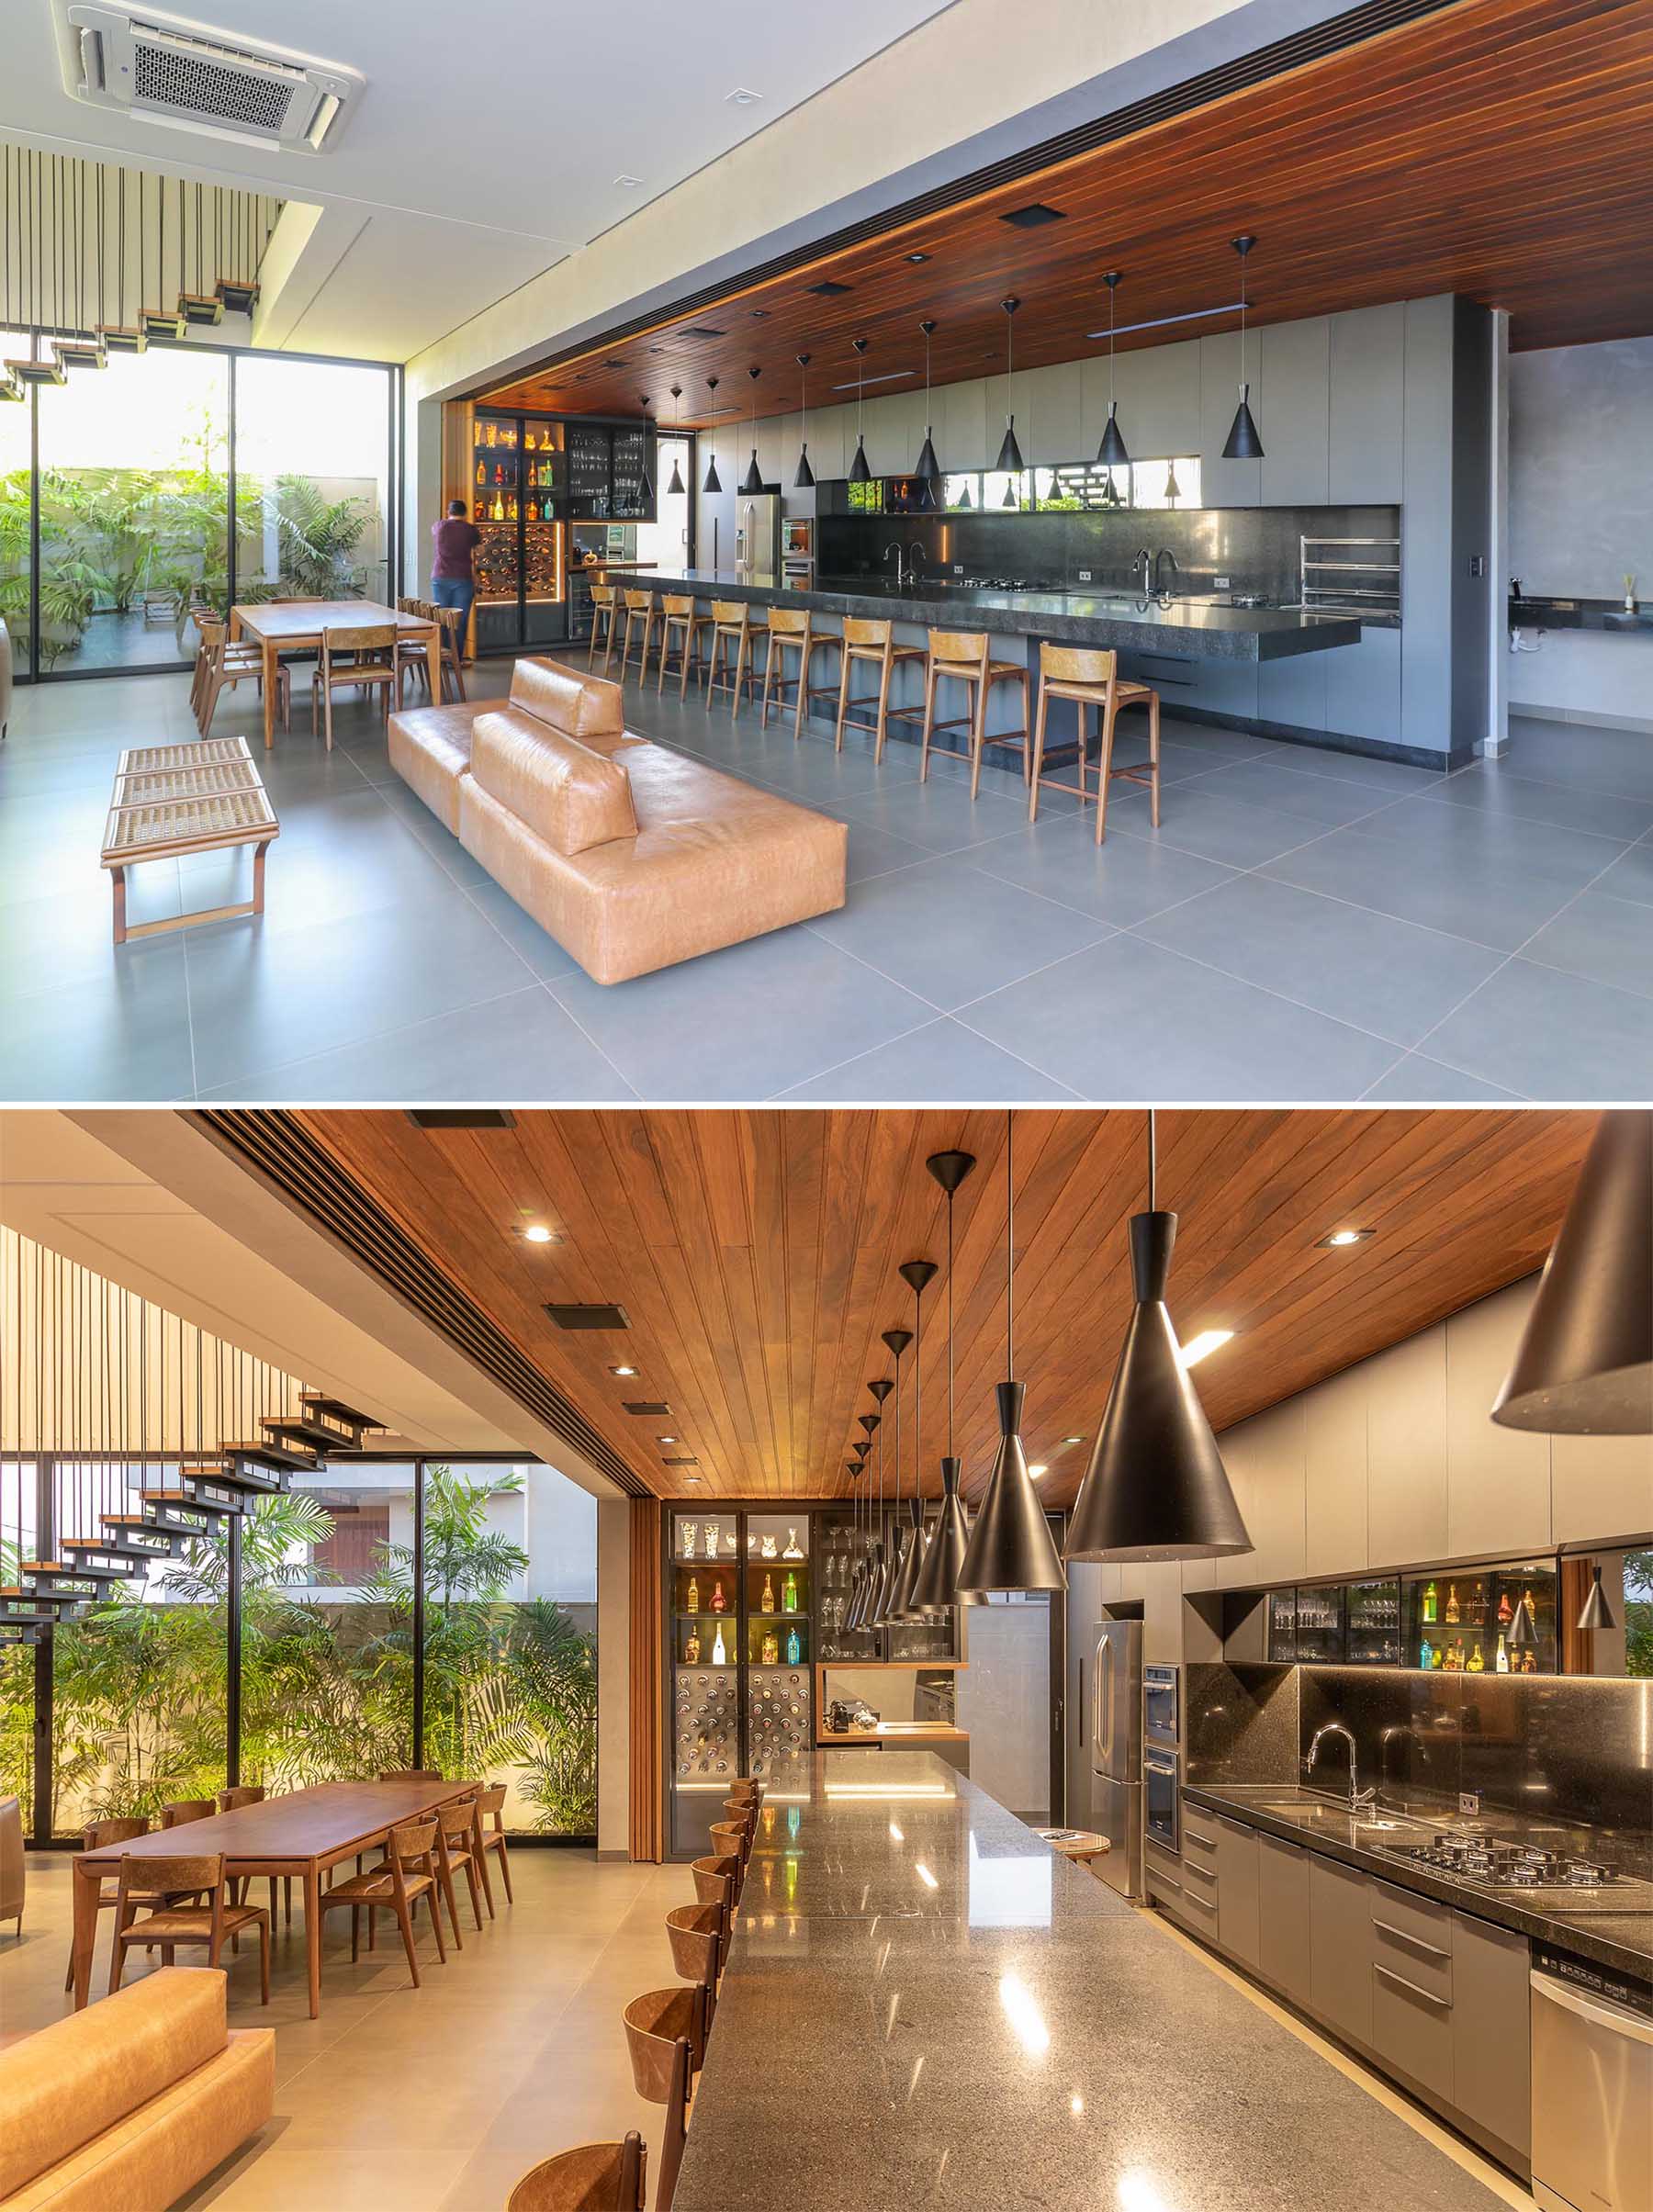 A modern home with a sliding wood wall that can hide the kitchen and expansive island from the open plan dining area and living room.